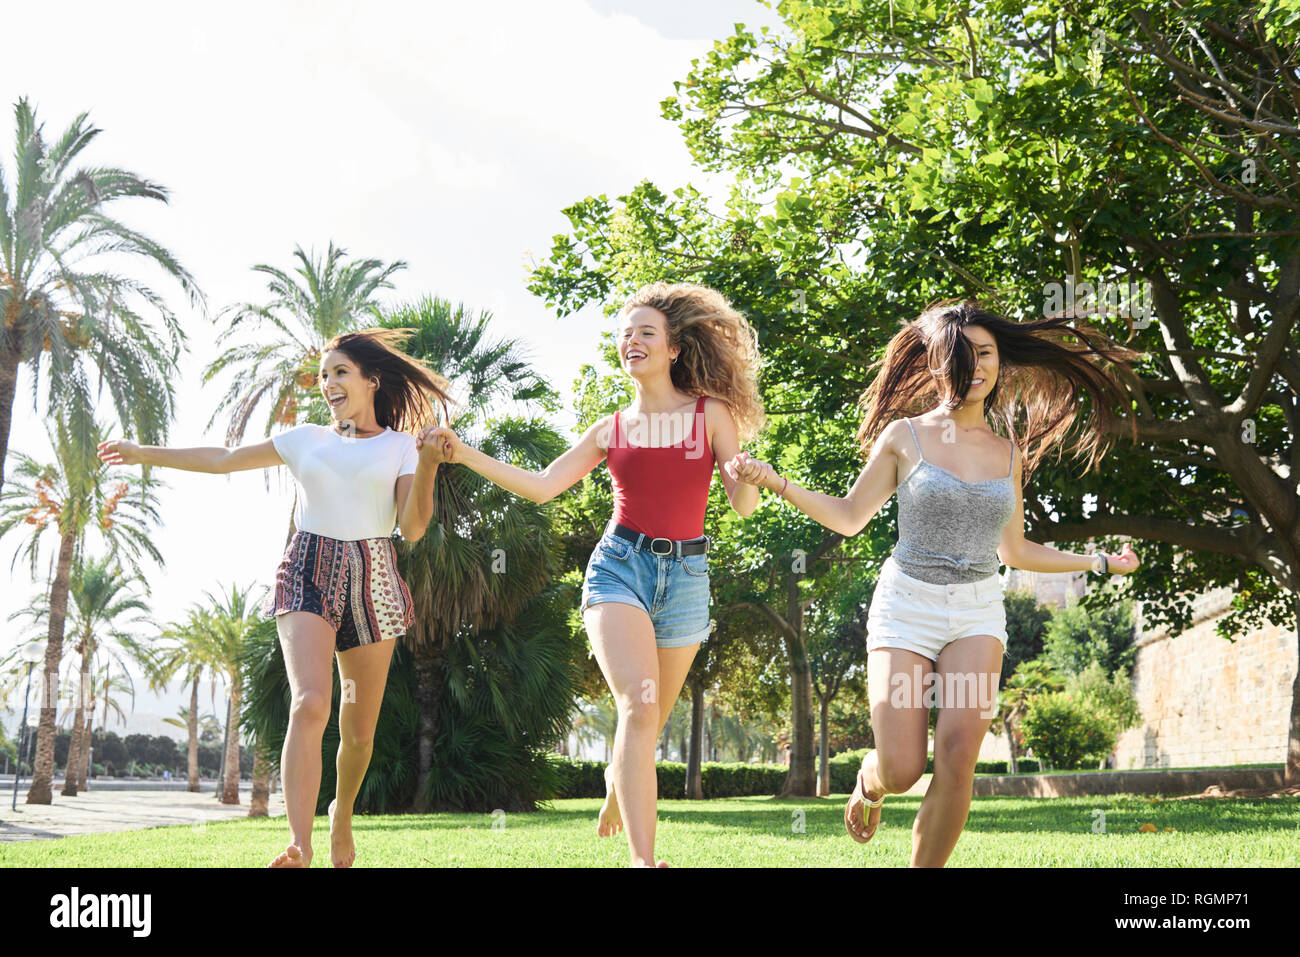 Spain, Mallorca, Palma, three happy young running holding hands together in a park in summer Stock Photo